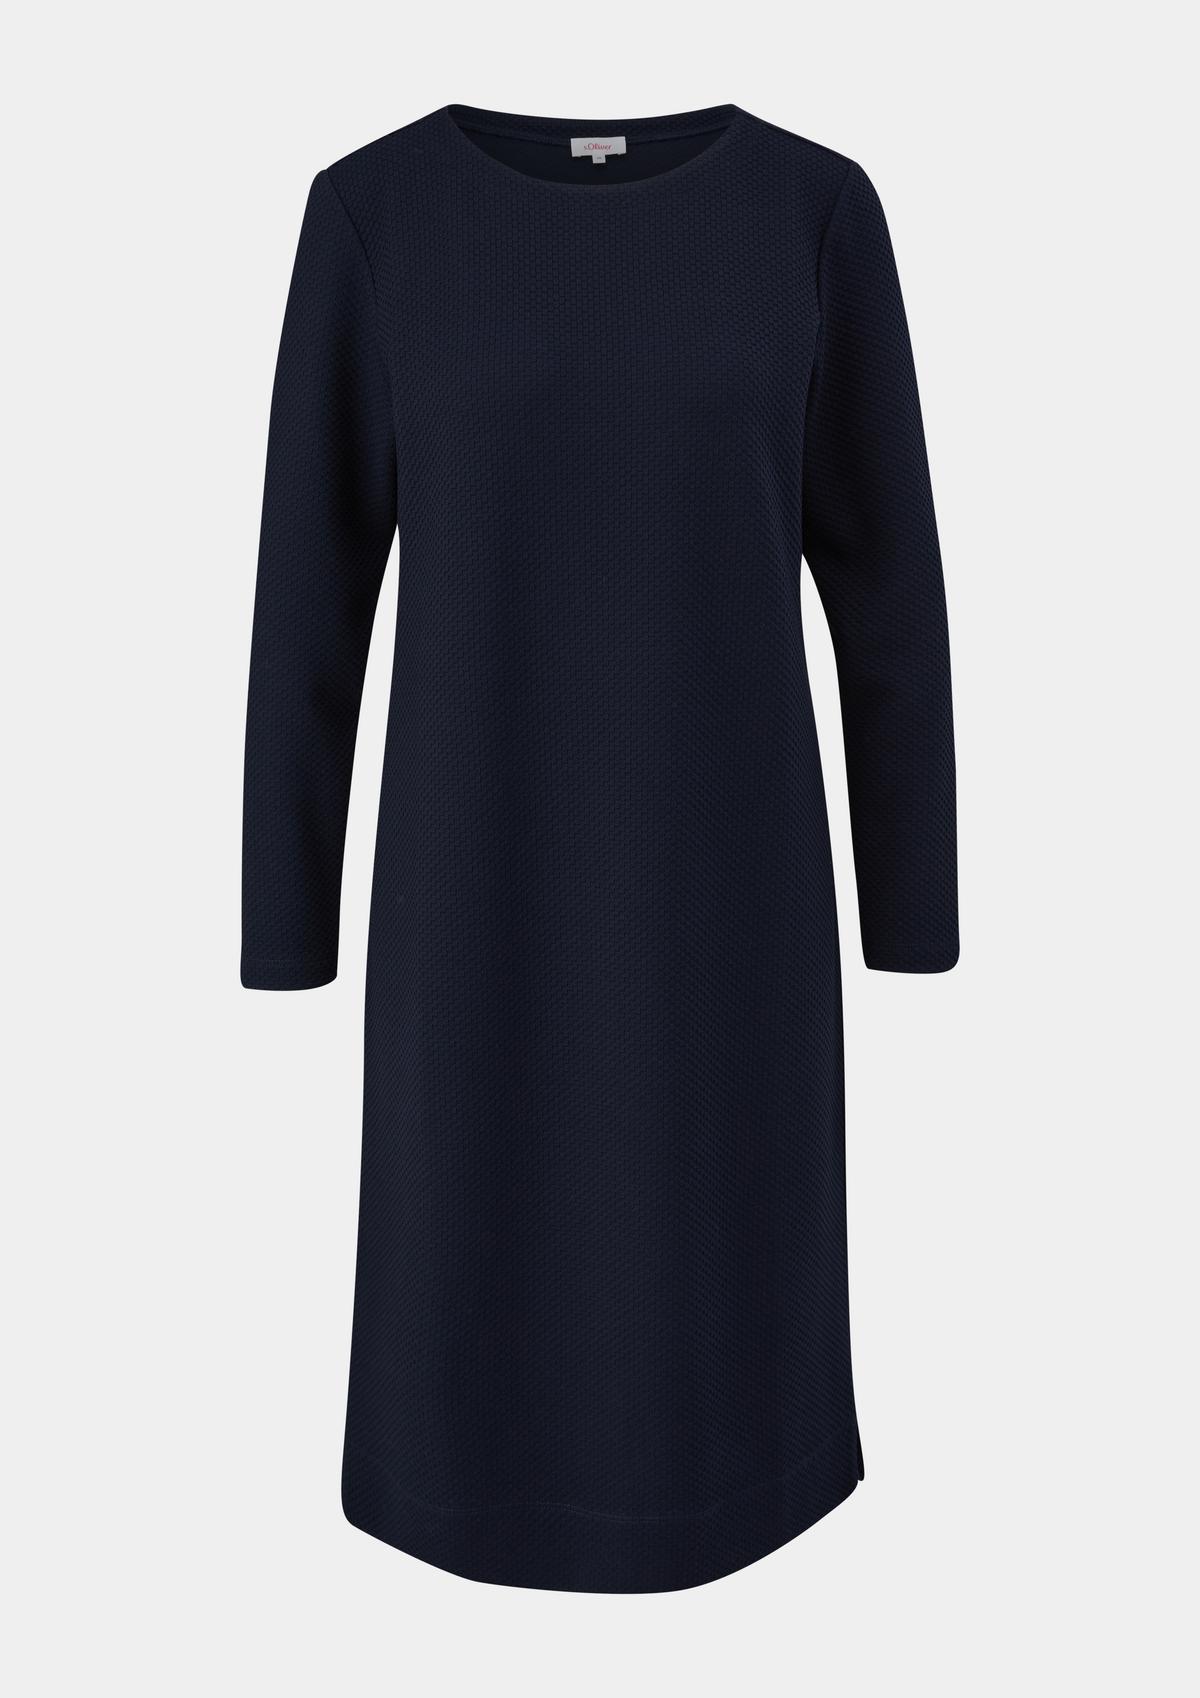 s.Oliver Jersey dress with a textured pattern